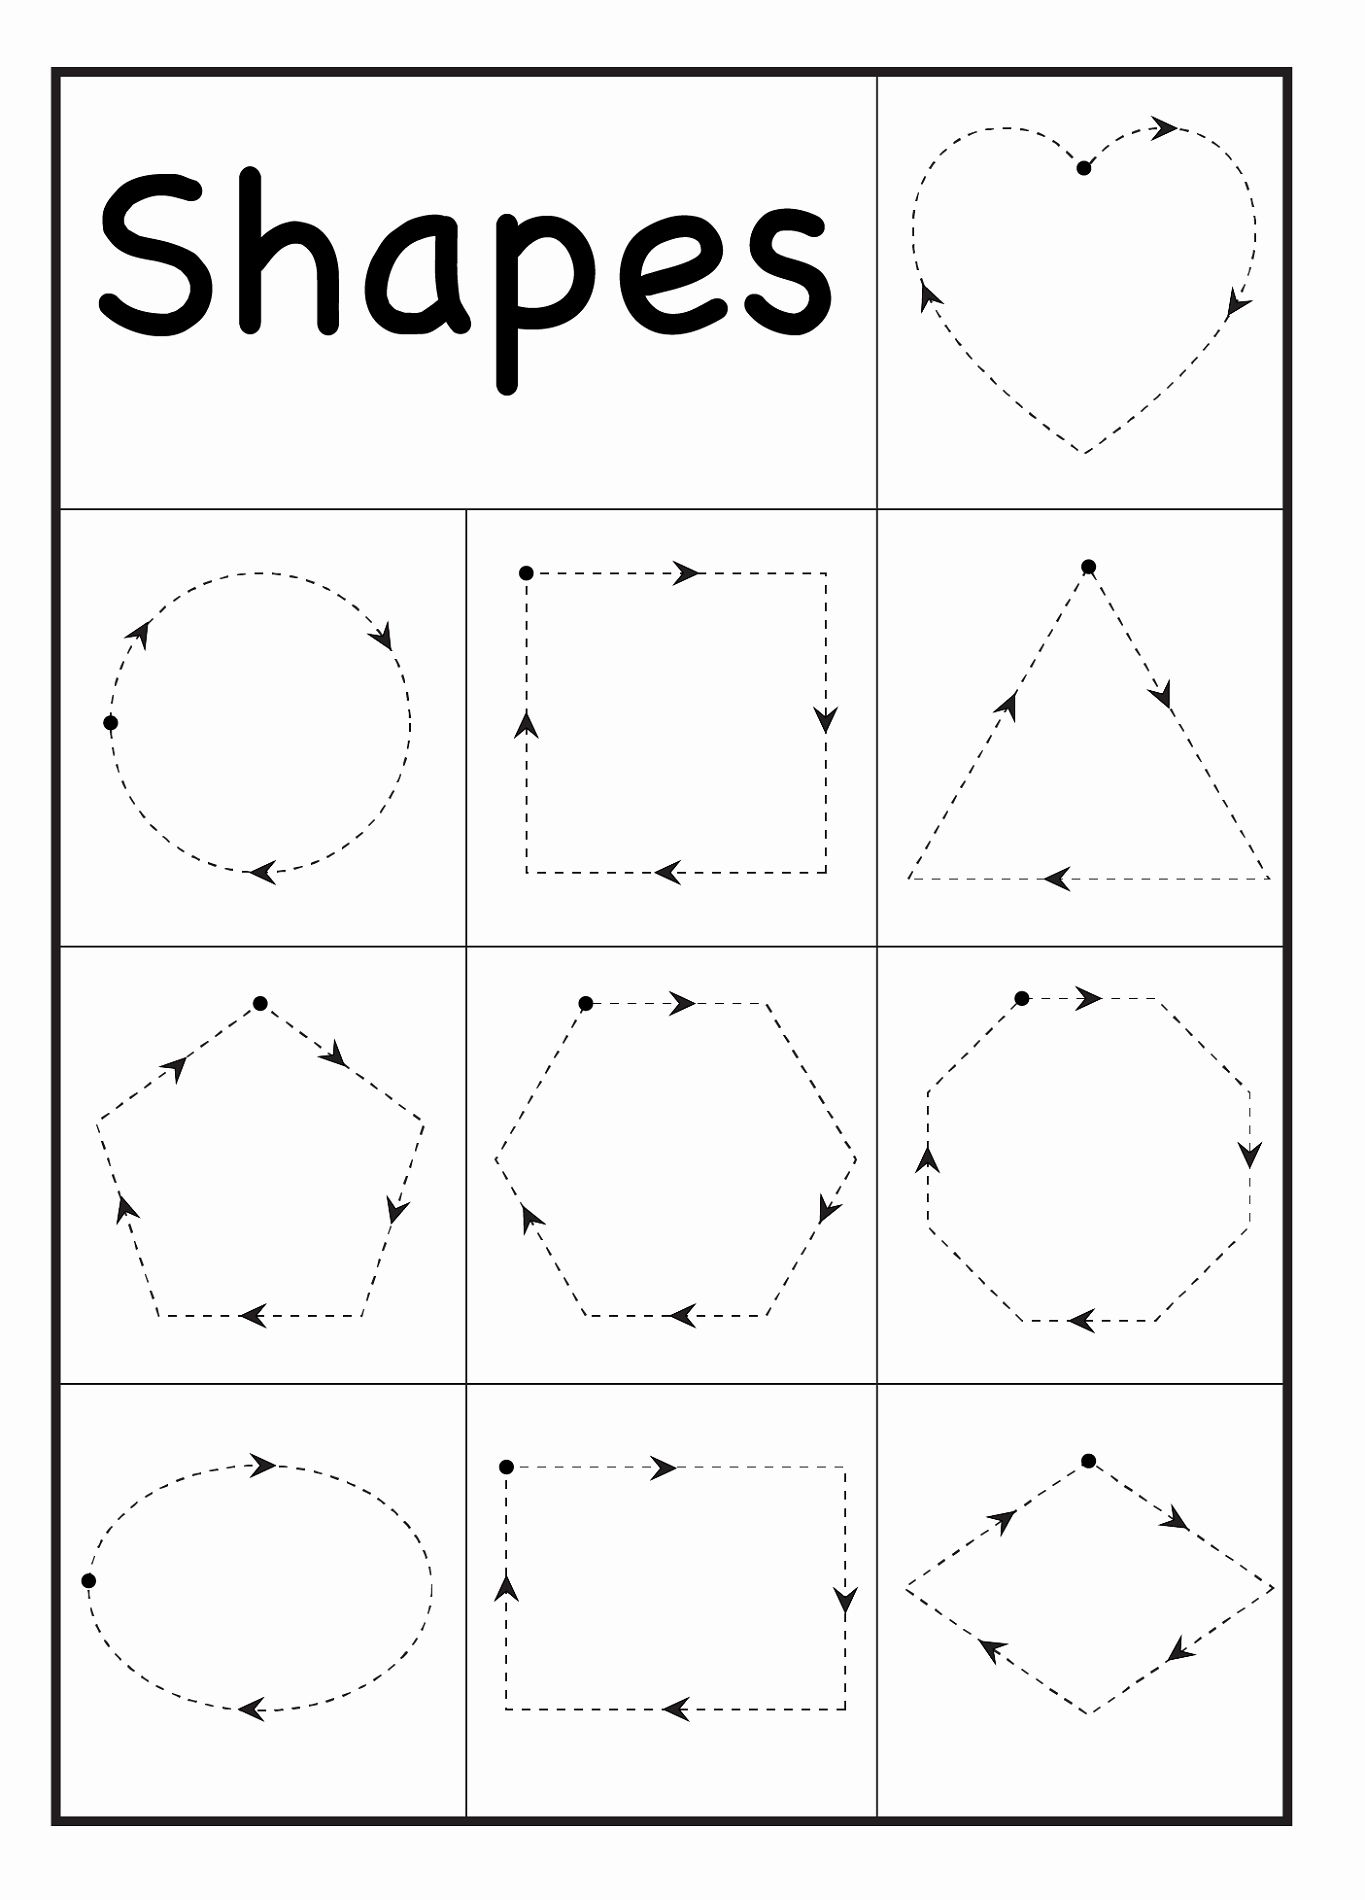 Alphabet Coloring Worksheets For 3 Year Olds In 2020 regarding Alphabet Worksheets For 3 Year Olds